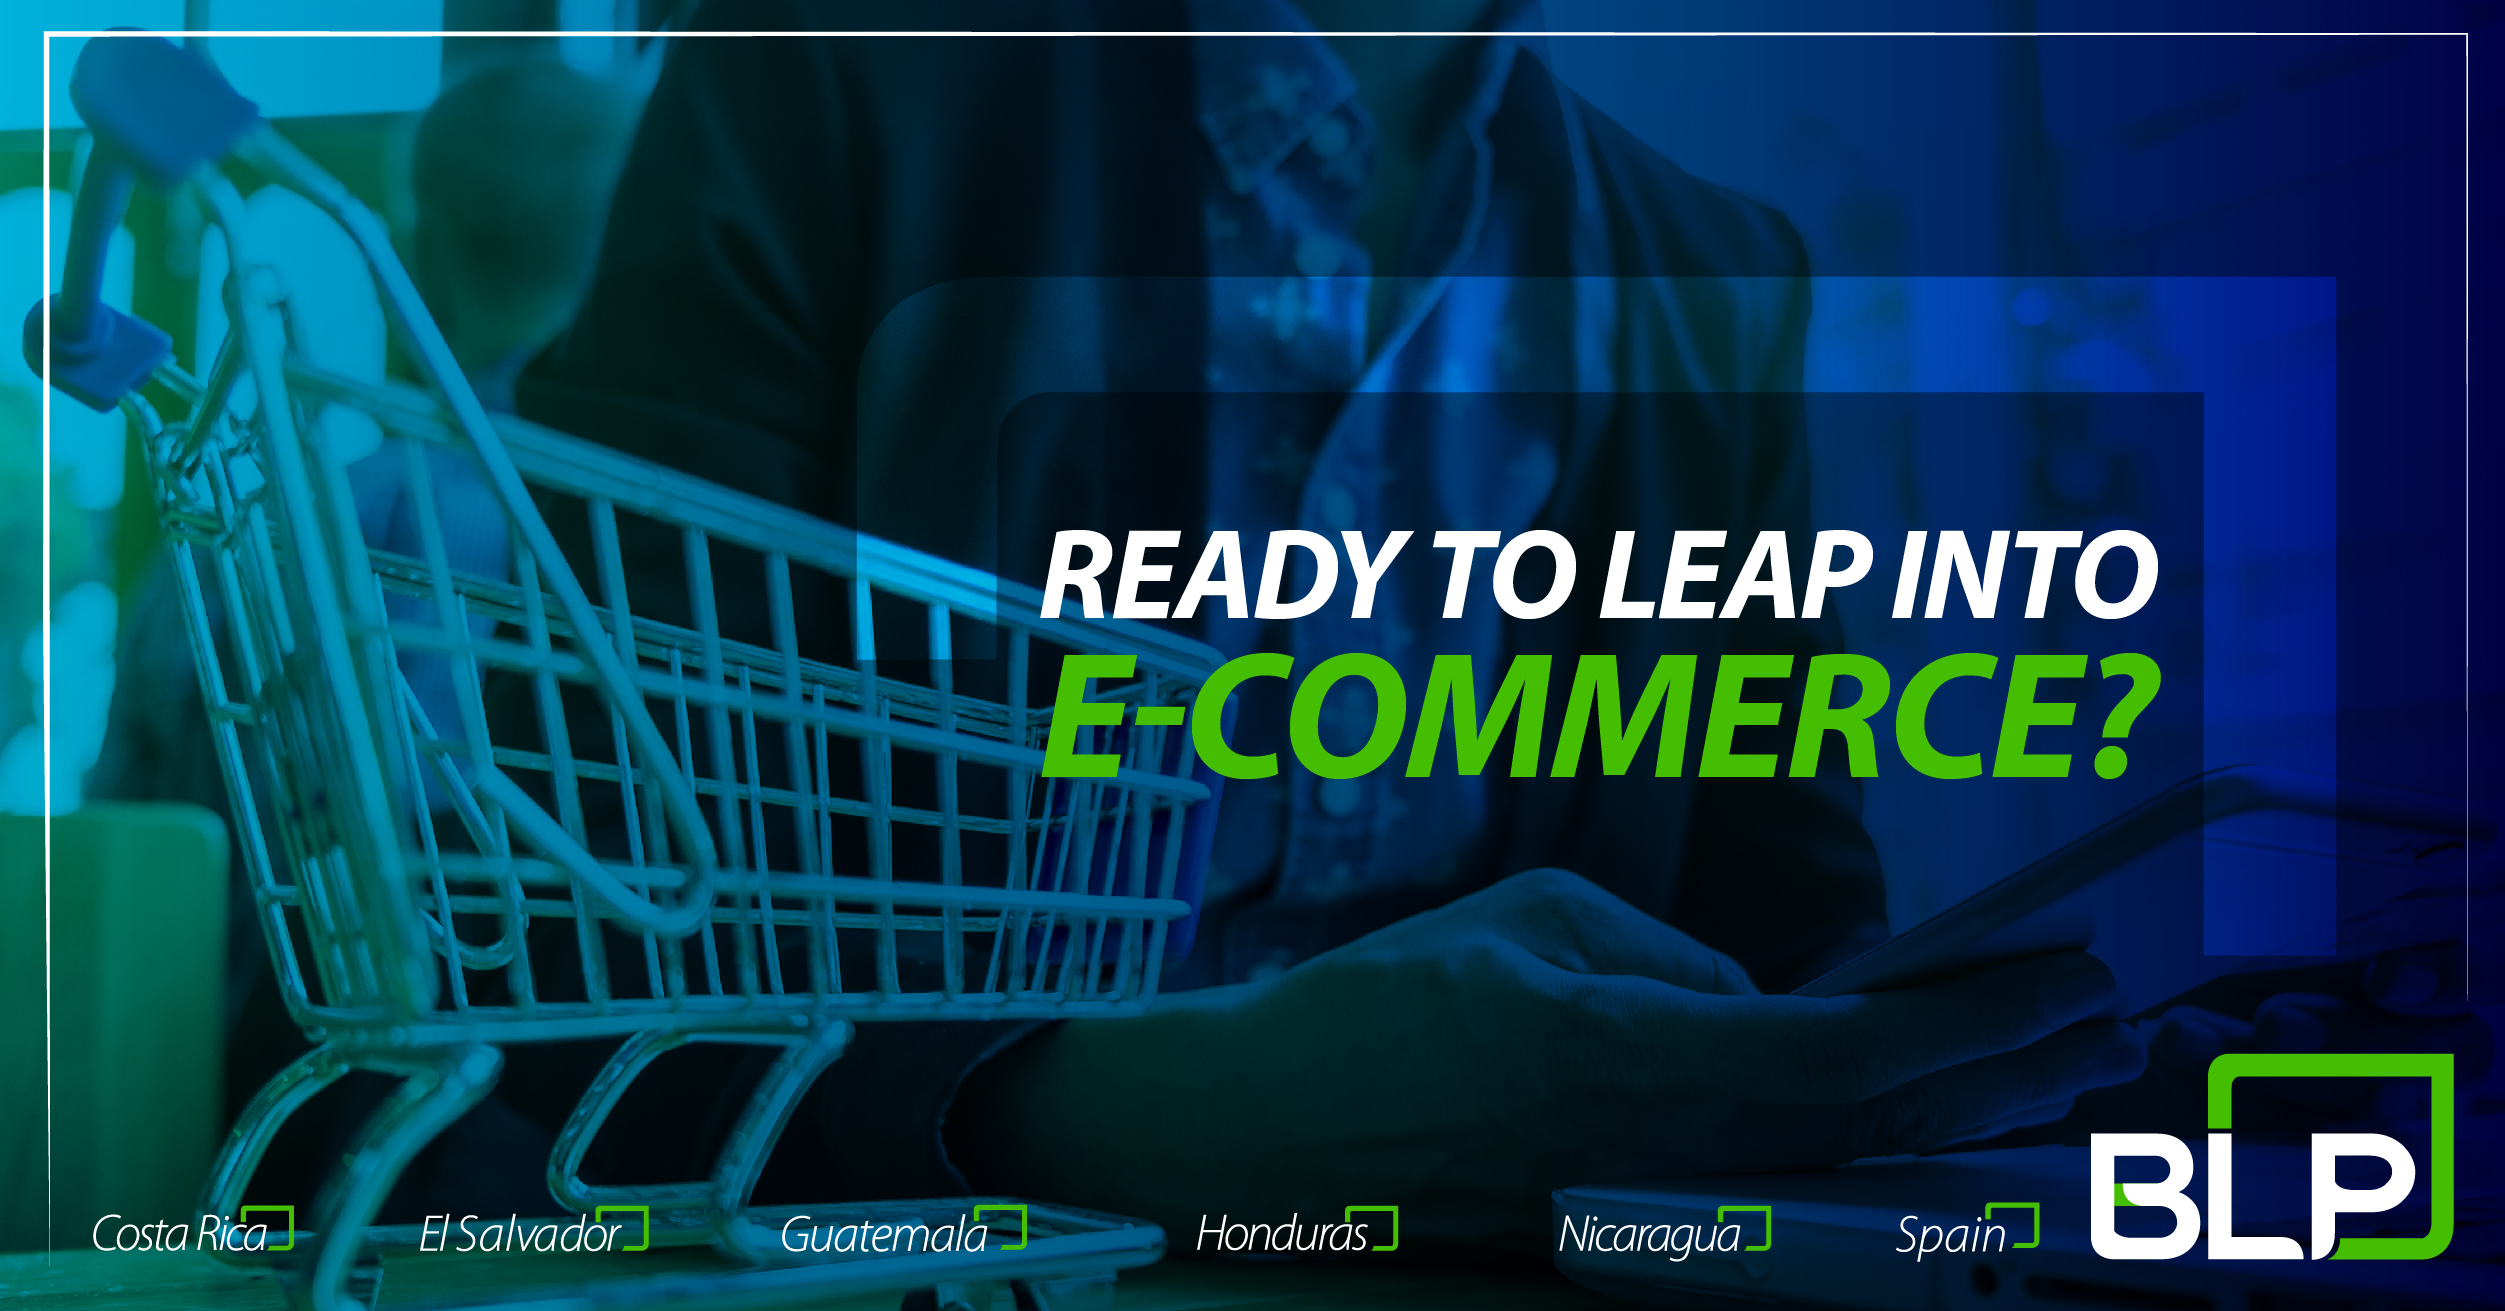 Ready to leap into e-commerce?